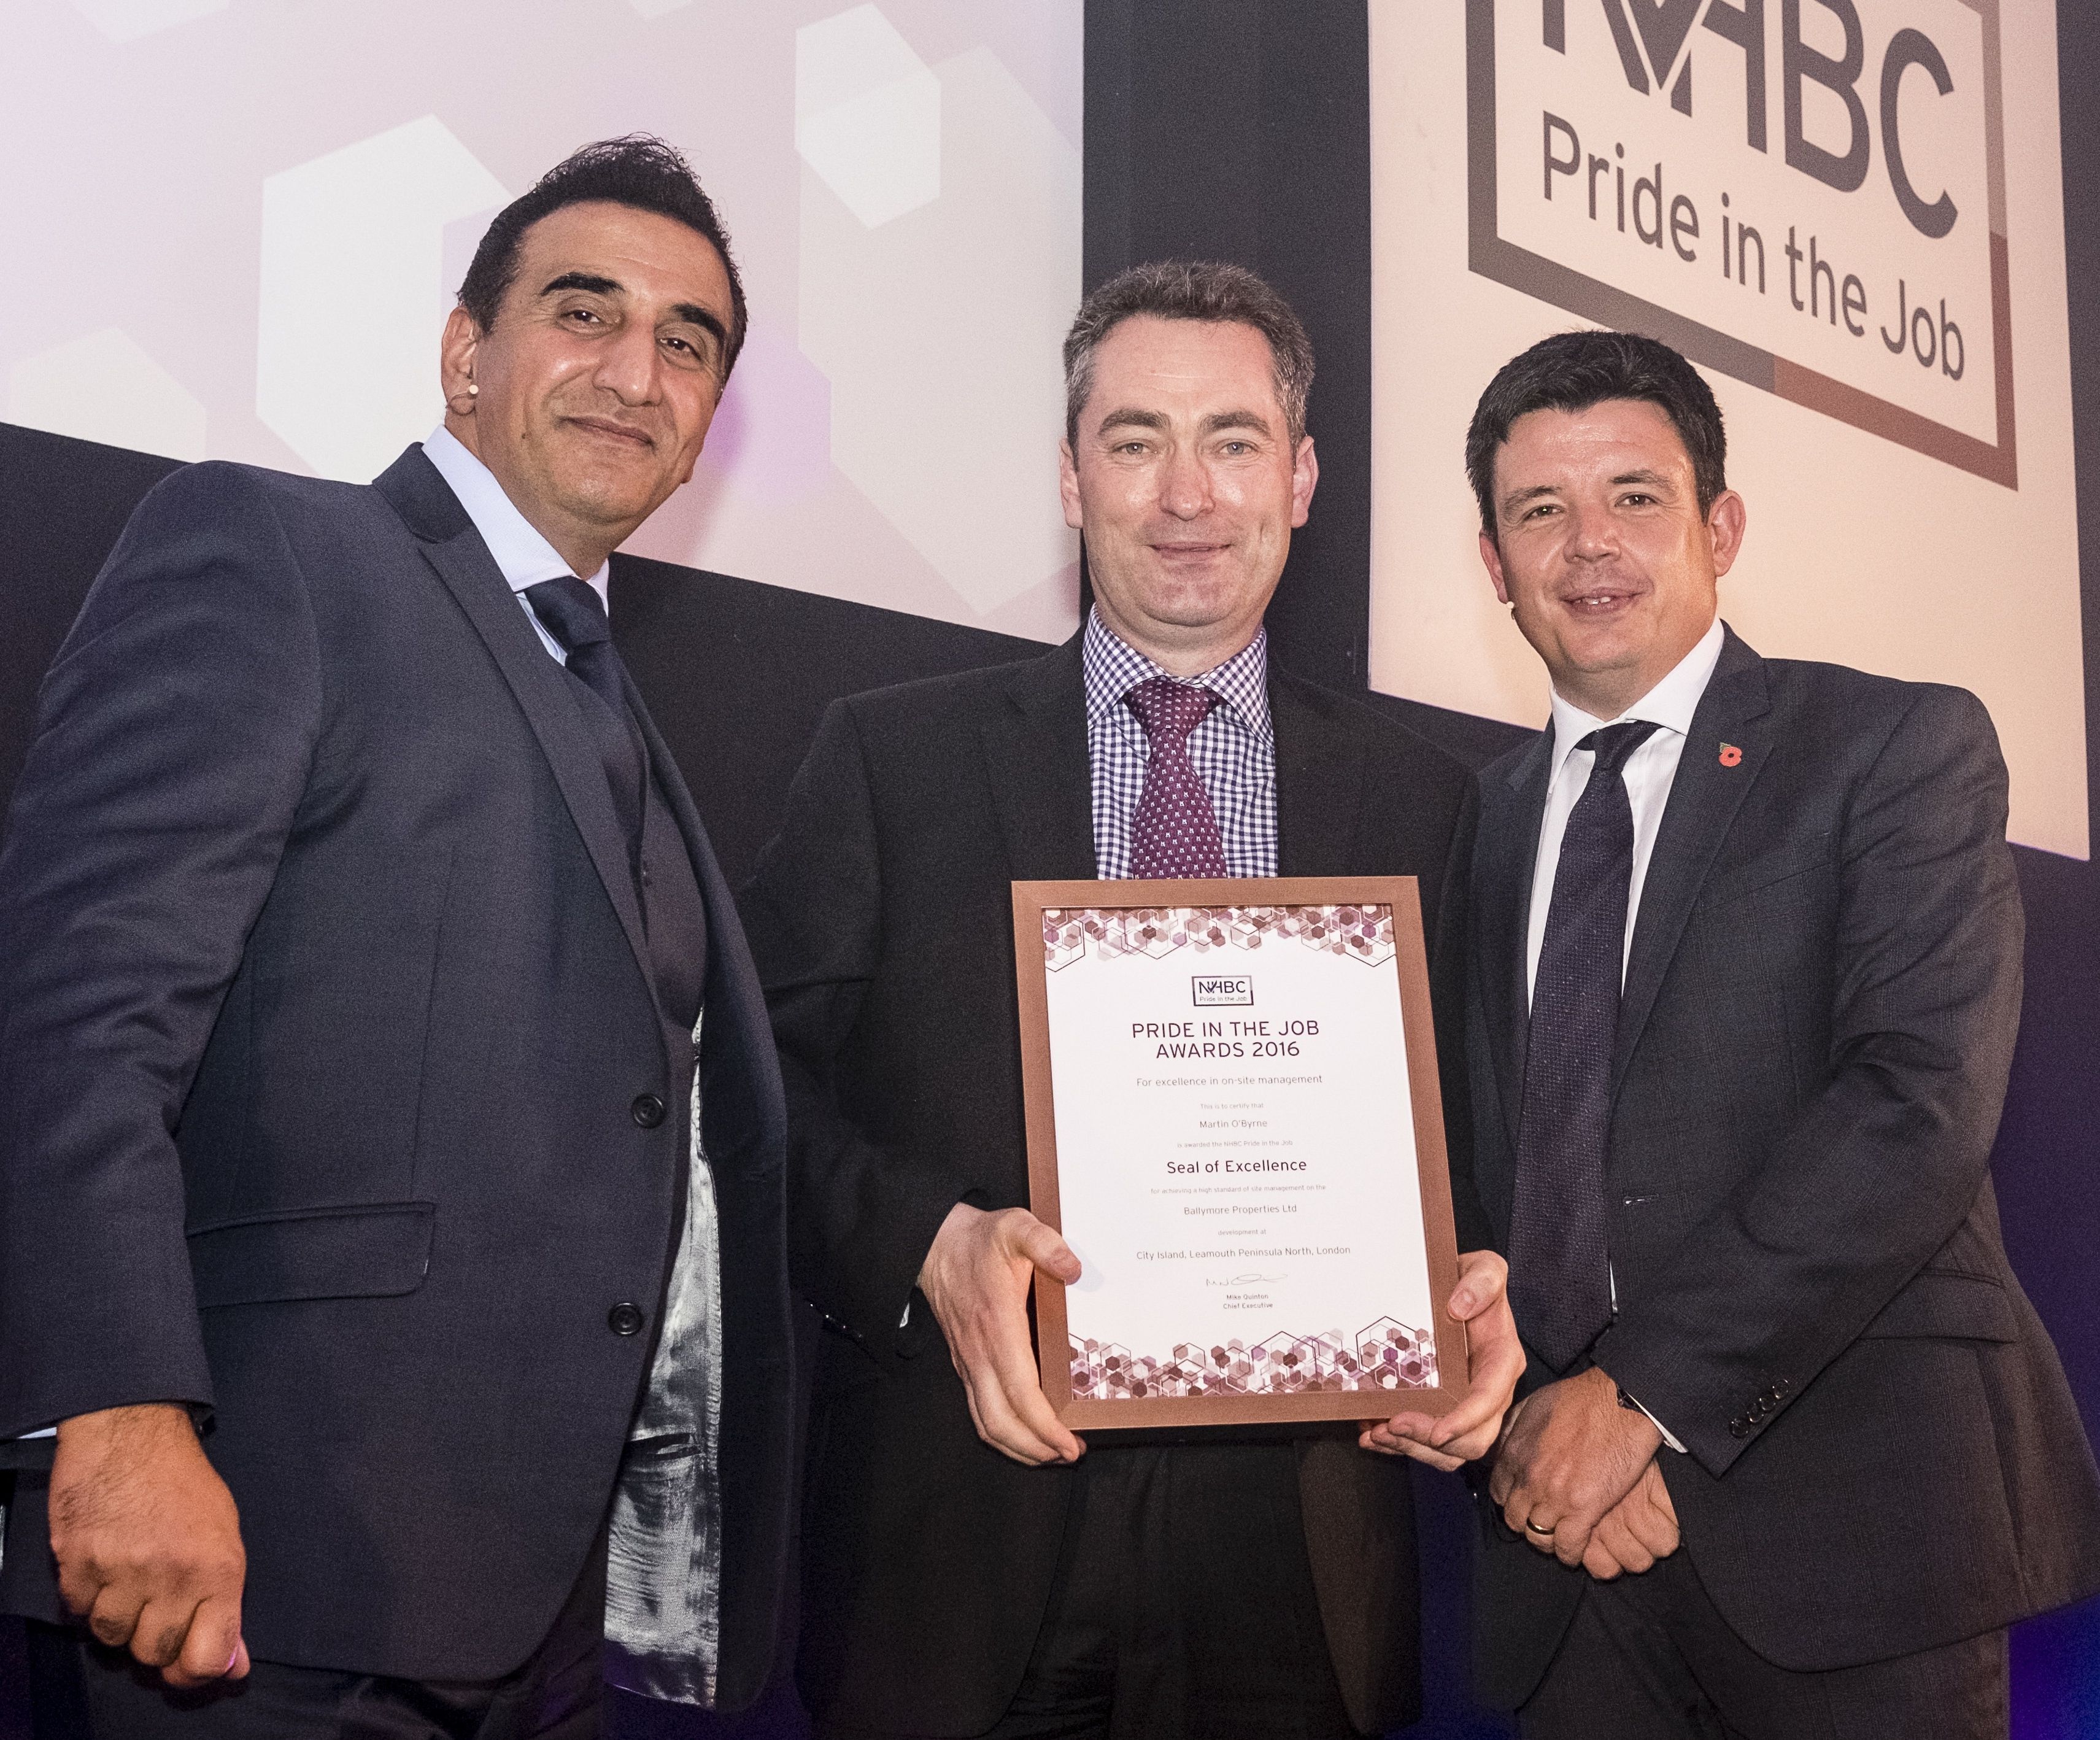 Ballymore site manager’s dedication and expertise rewarded